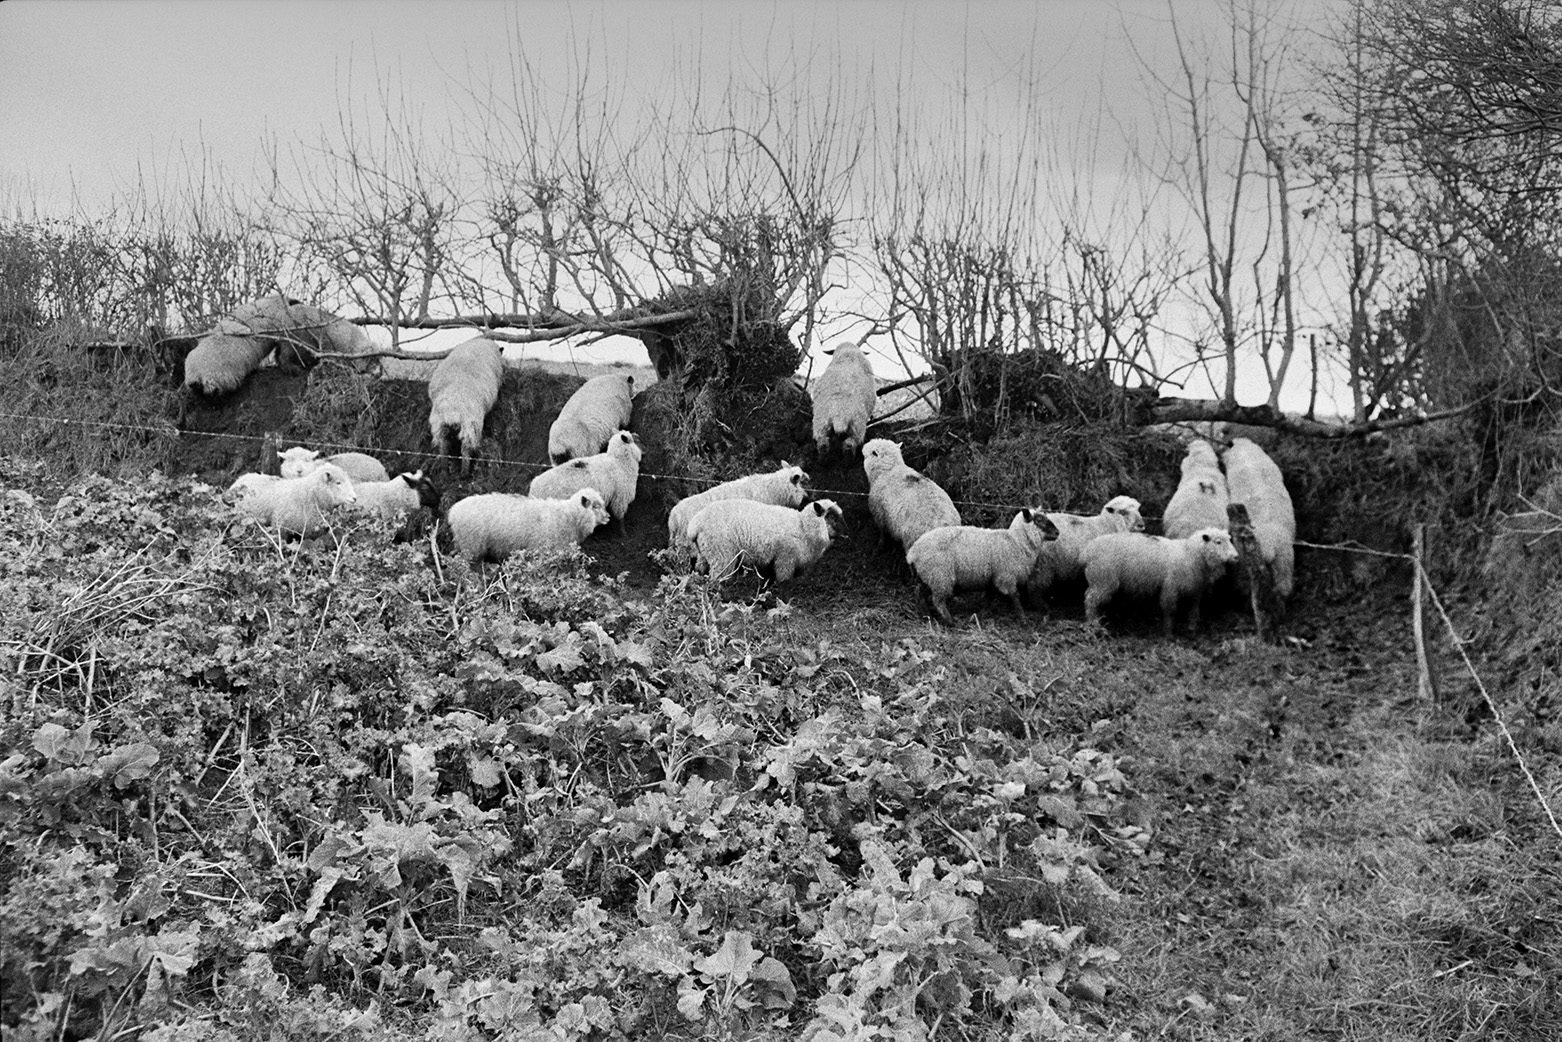 Phil Herd's sheep being moved through gaps in a hedge, out of a field with a kale crop.